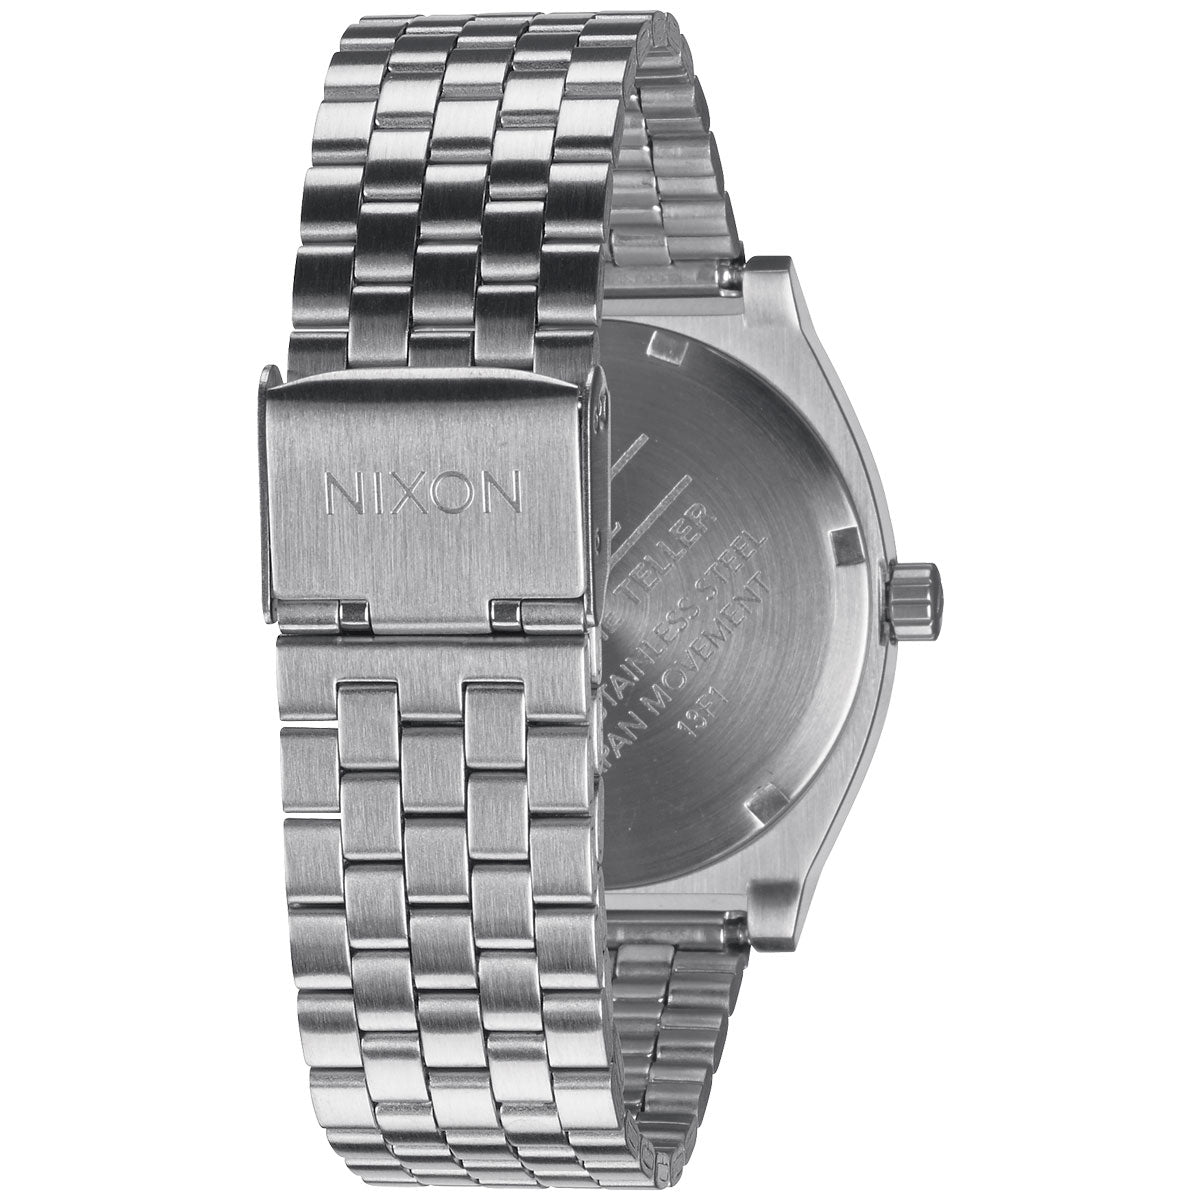 Nixon Time Teller Watch - Silver/Turquoise image 4